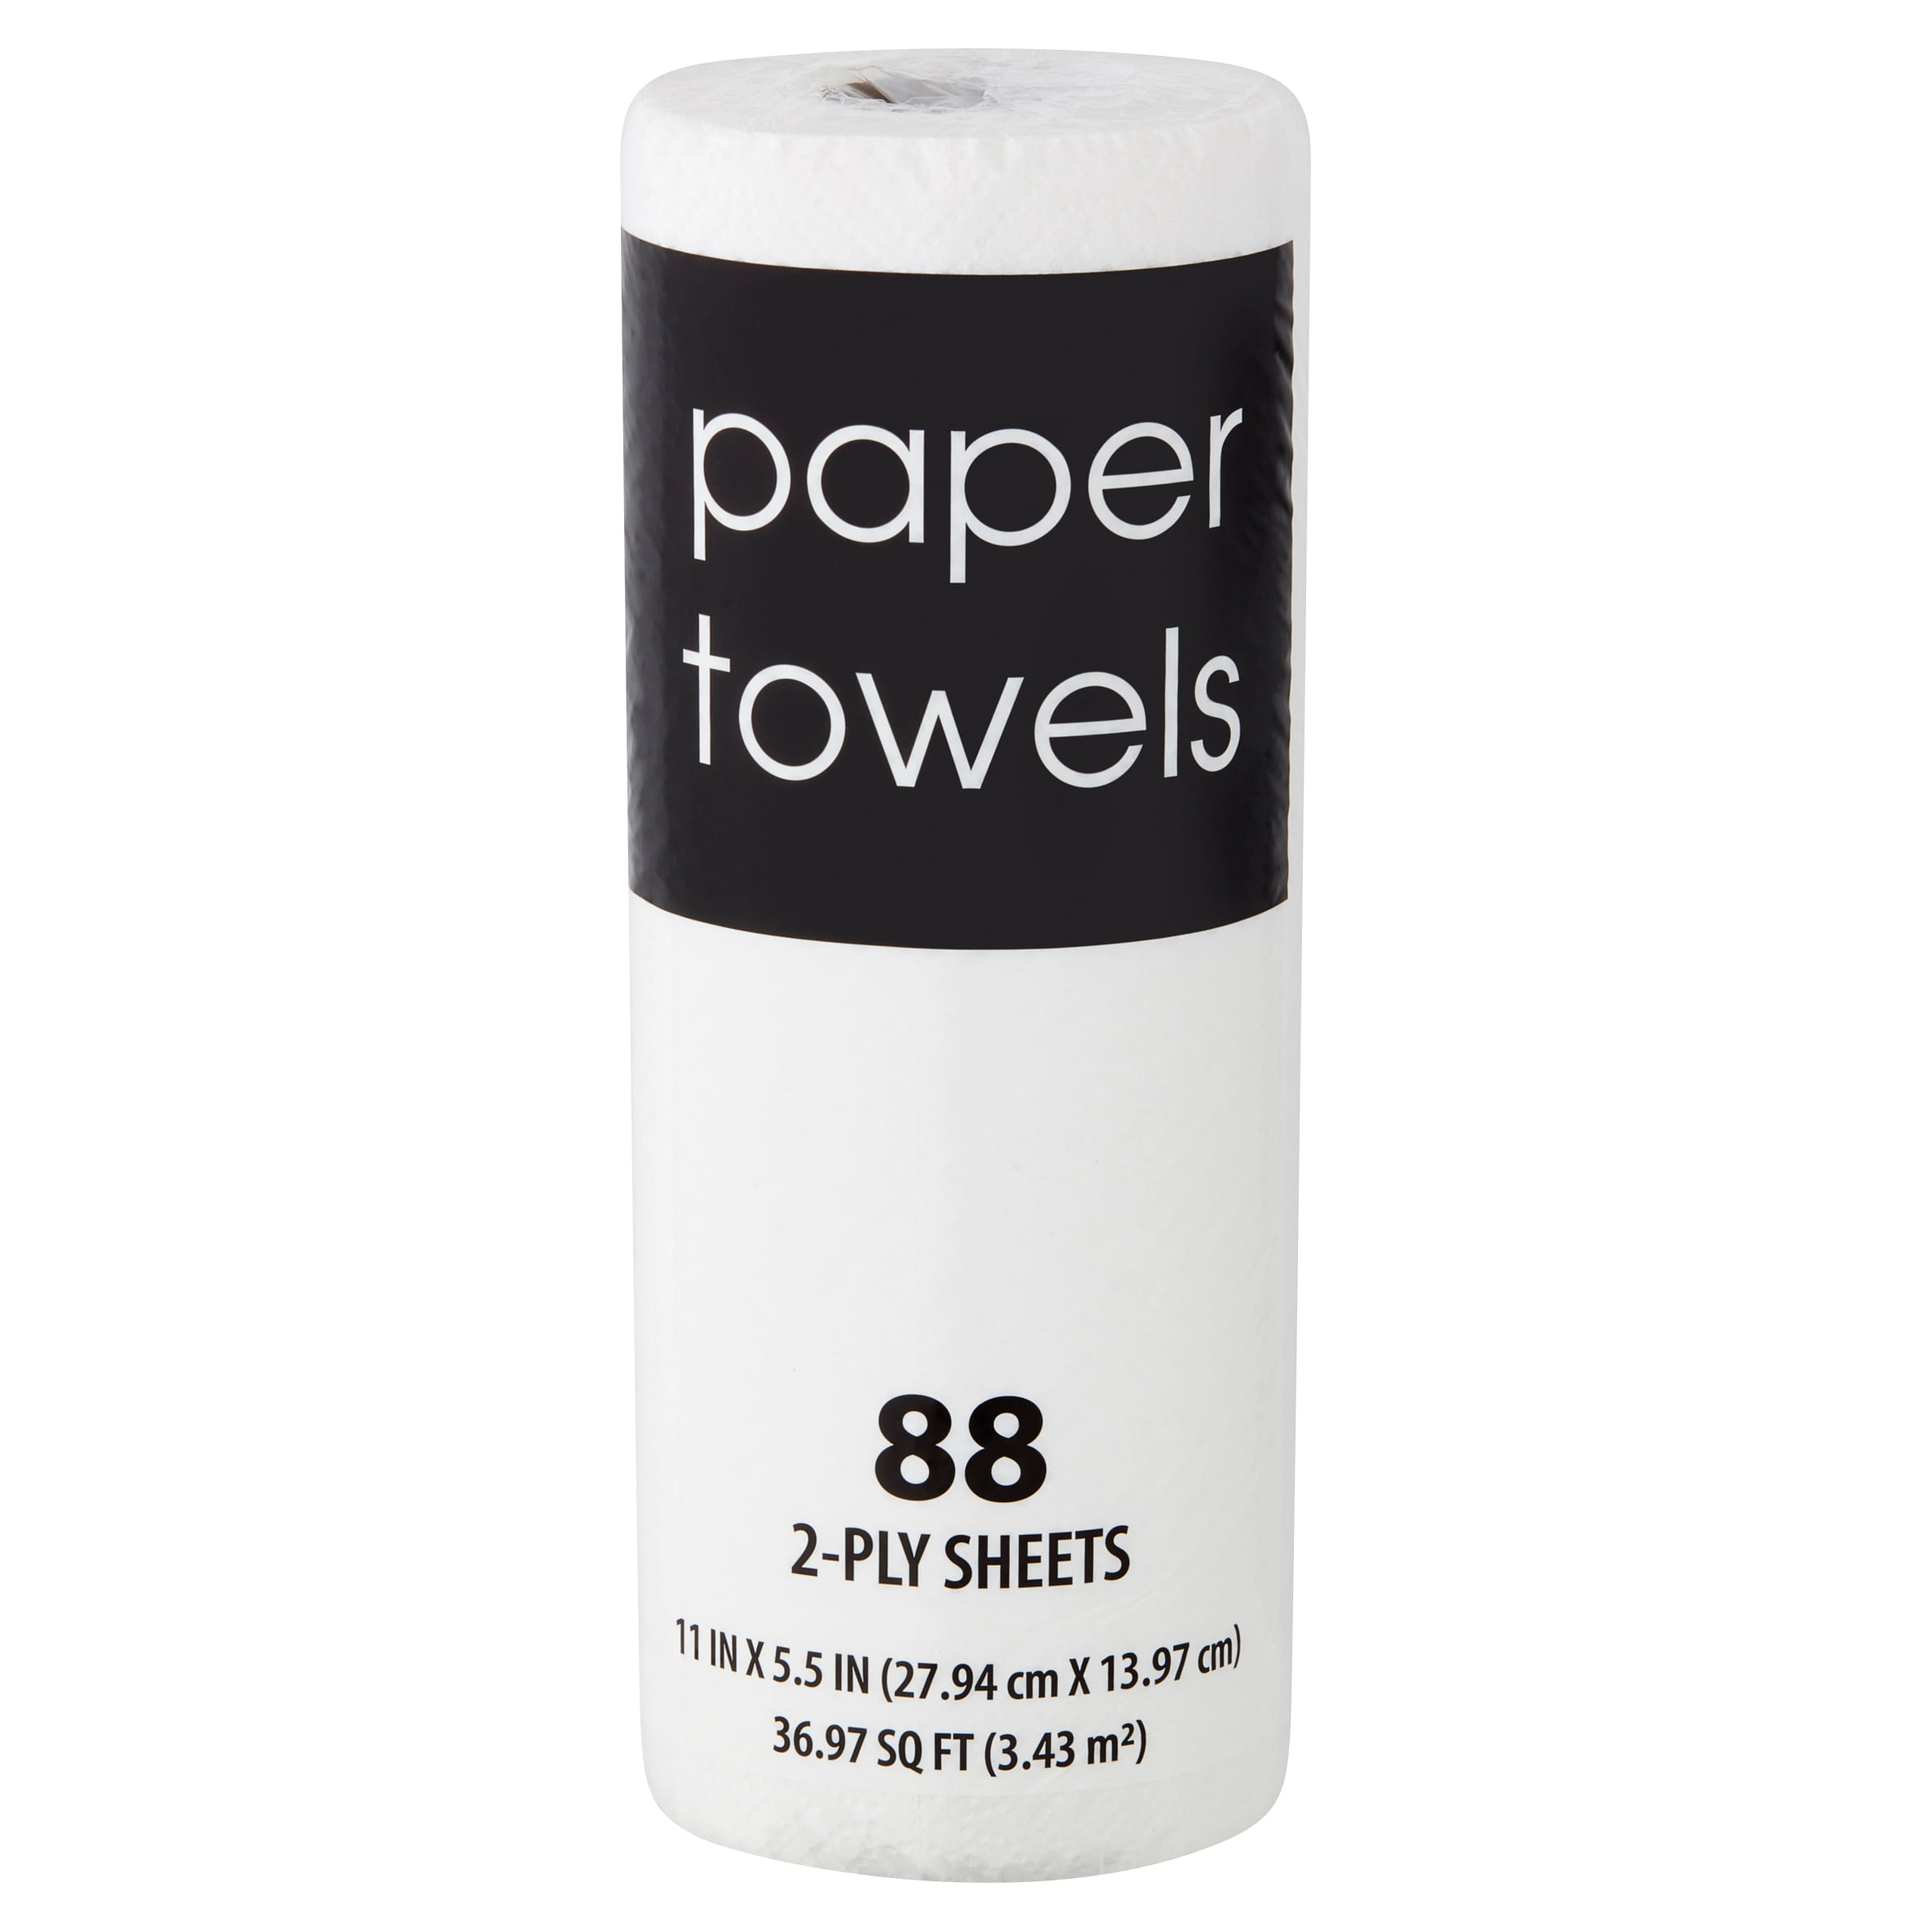 2-Ply Paper Towels, 1 Roll, 88 Sheets